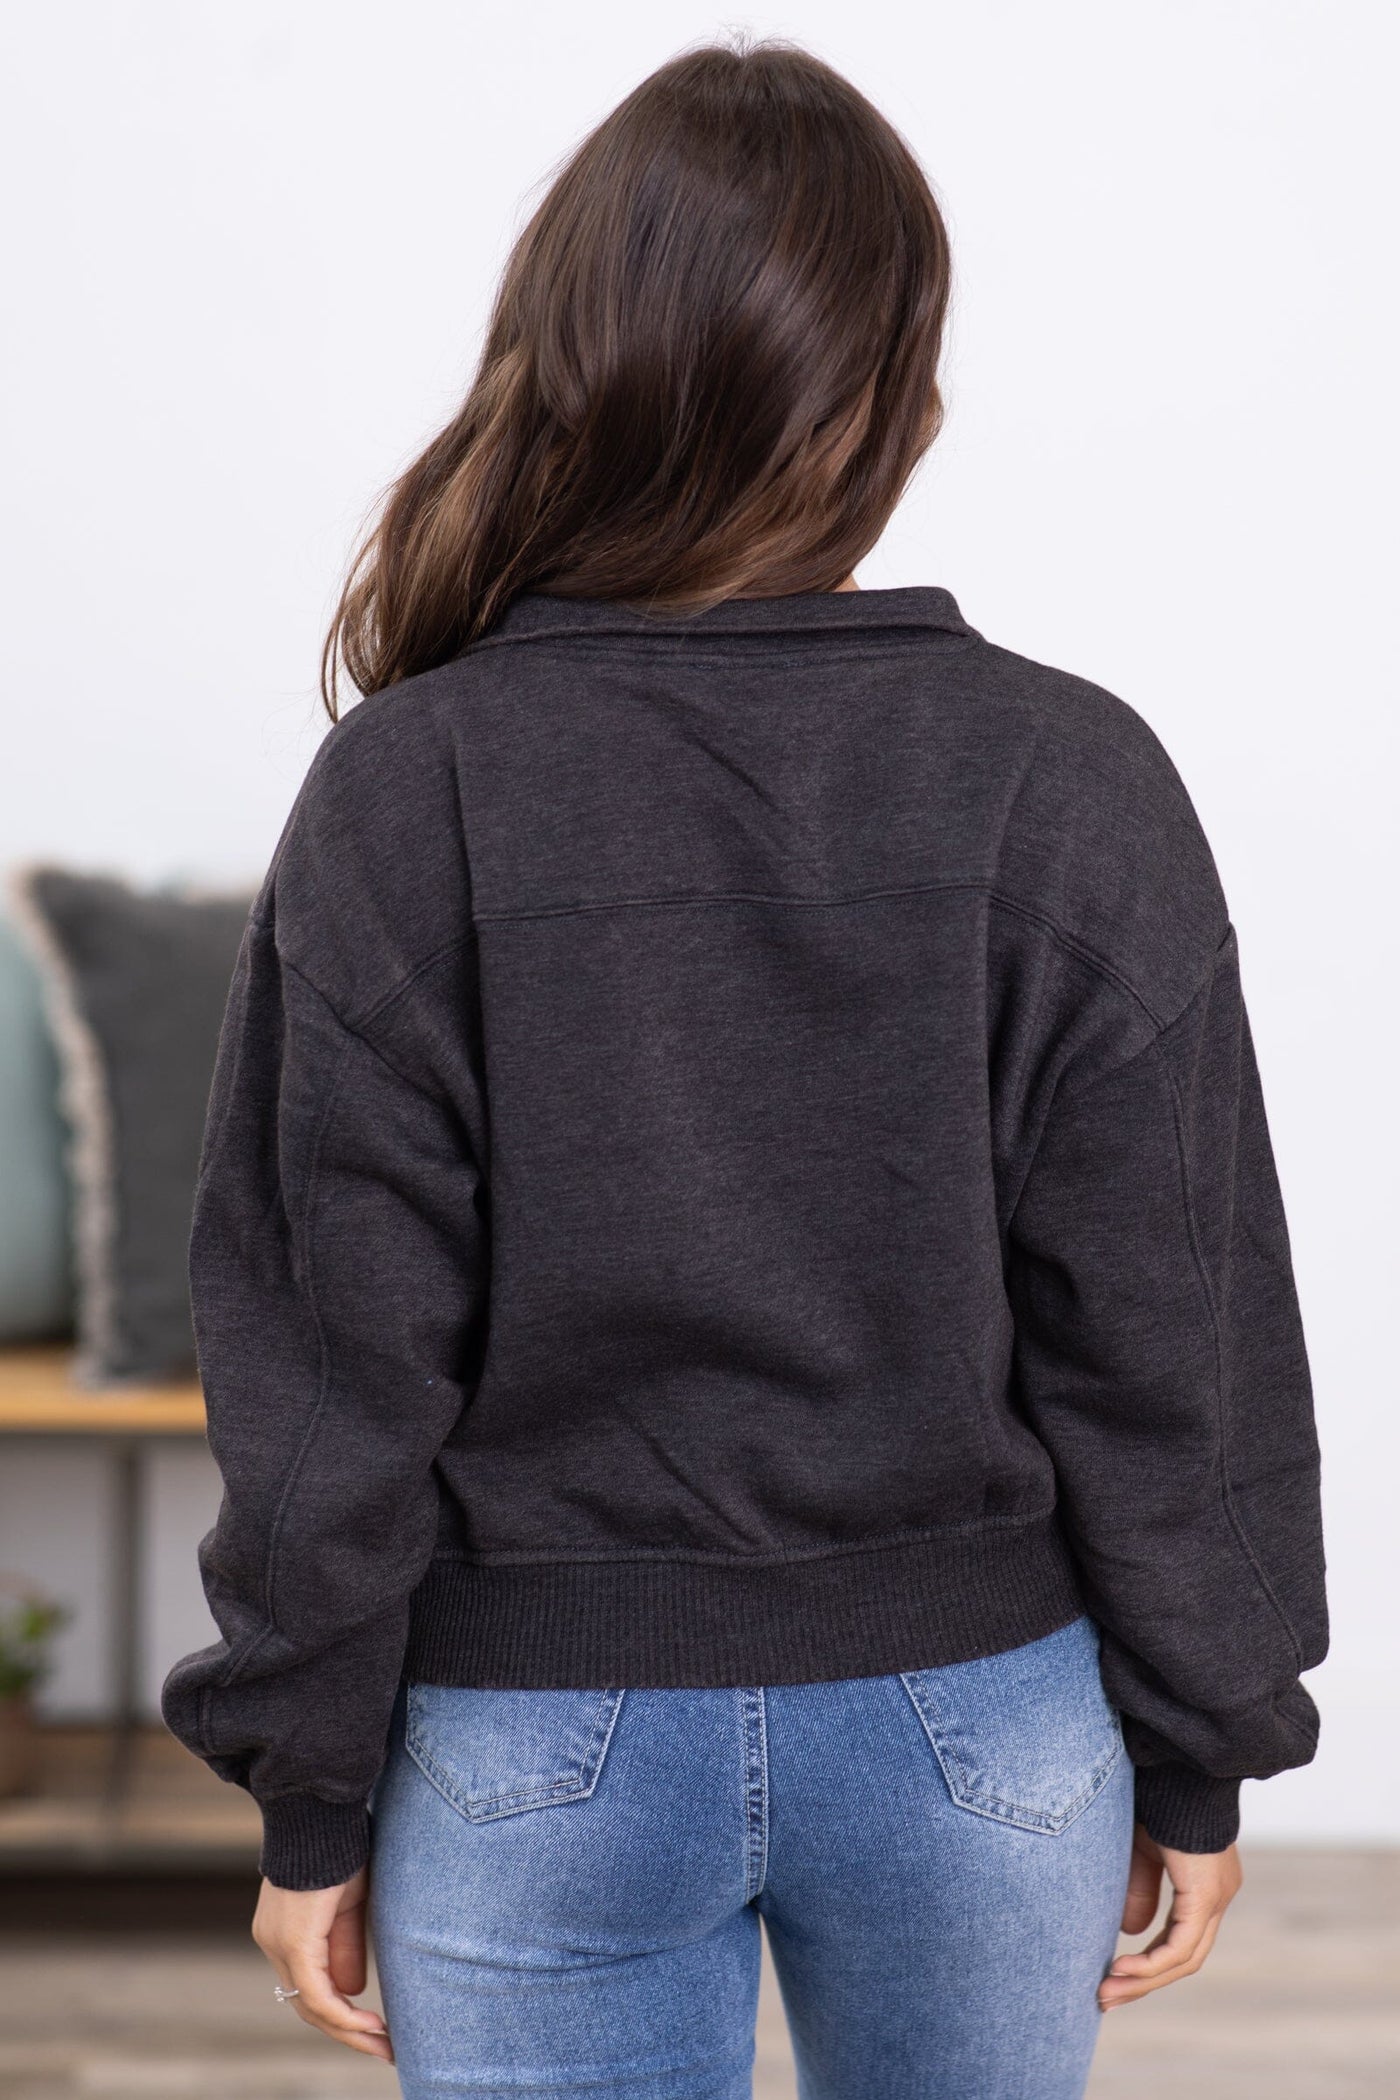 Charcoal Acid Wash Fleece 1/4 Zip Pullover - Filly Flair